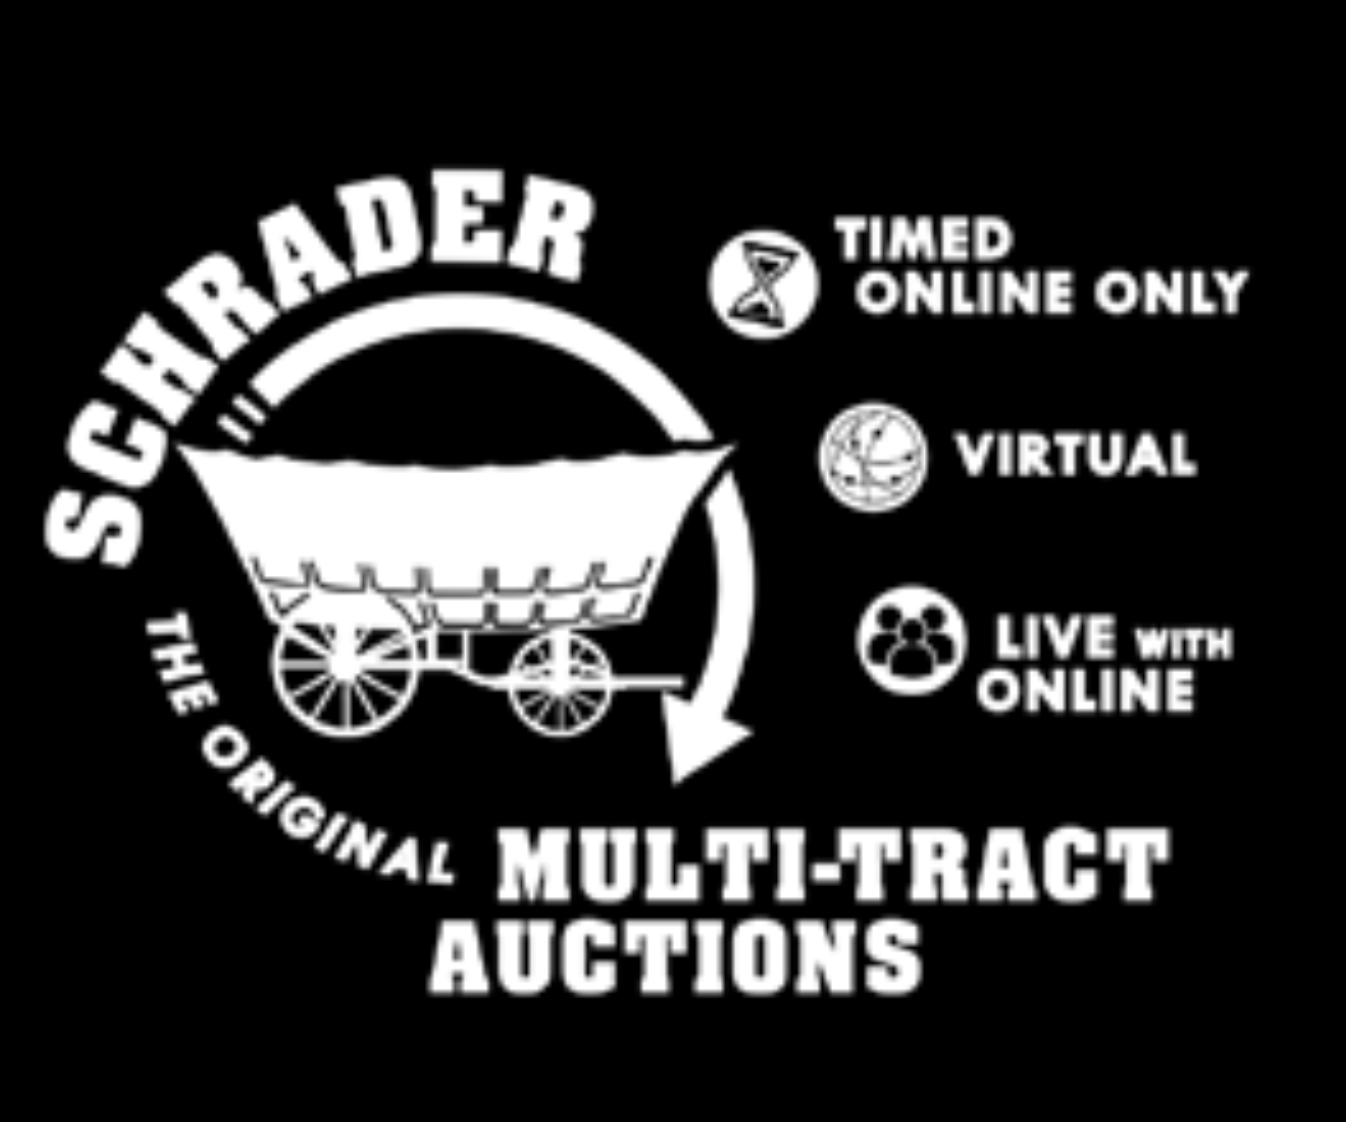 Schrader Real Estate and Auction Co Inc Wagon Logo